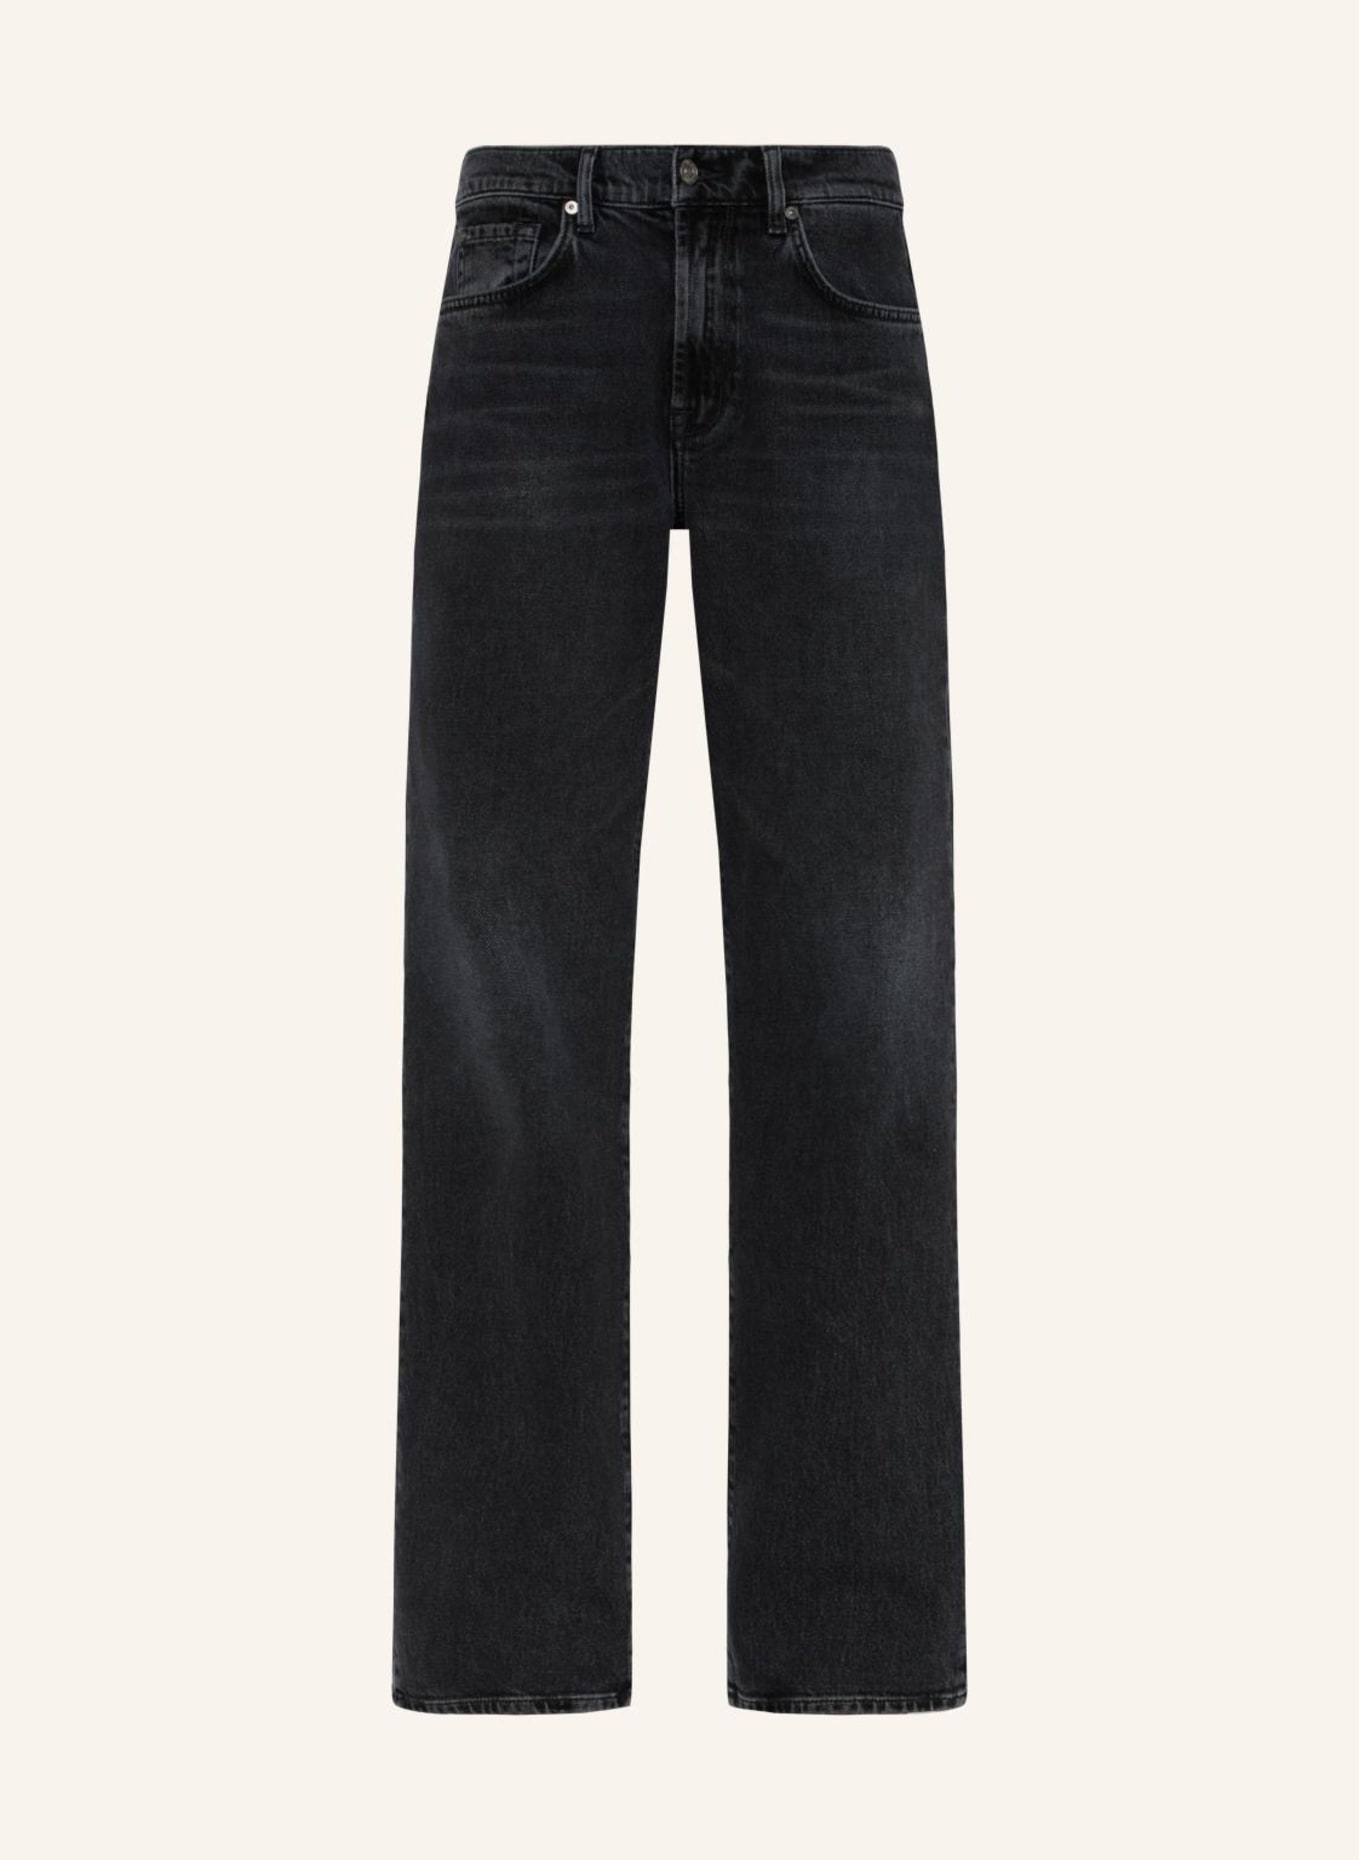 7 for all mankind Jeans TESS TROUSER Straight Fit, Farbe: SCHWARZ (Bild 1)